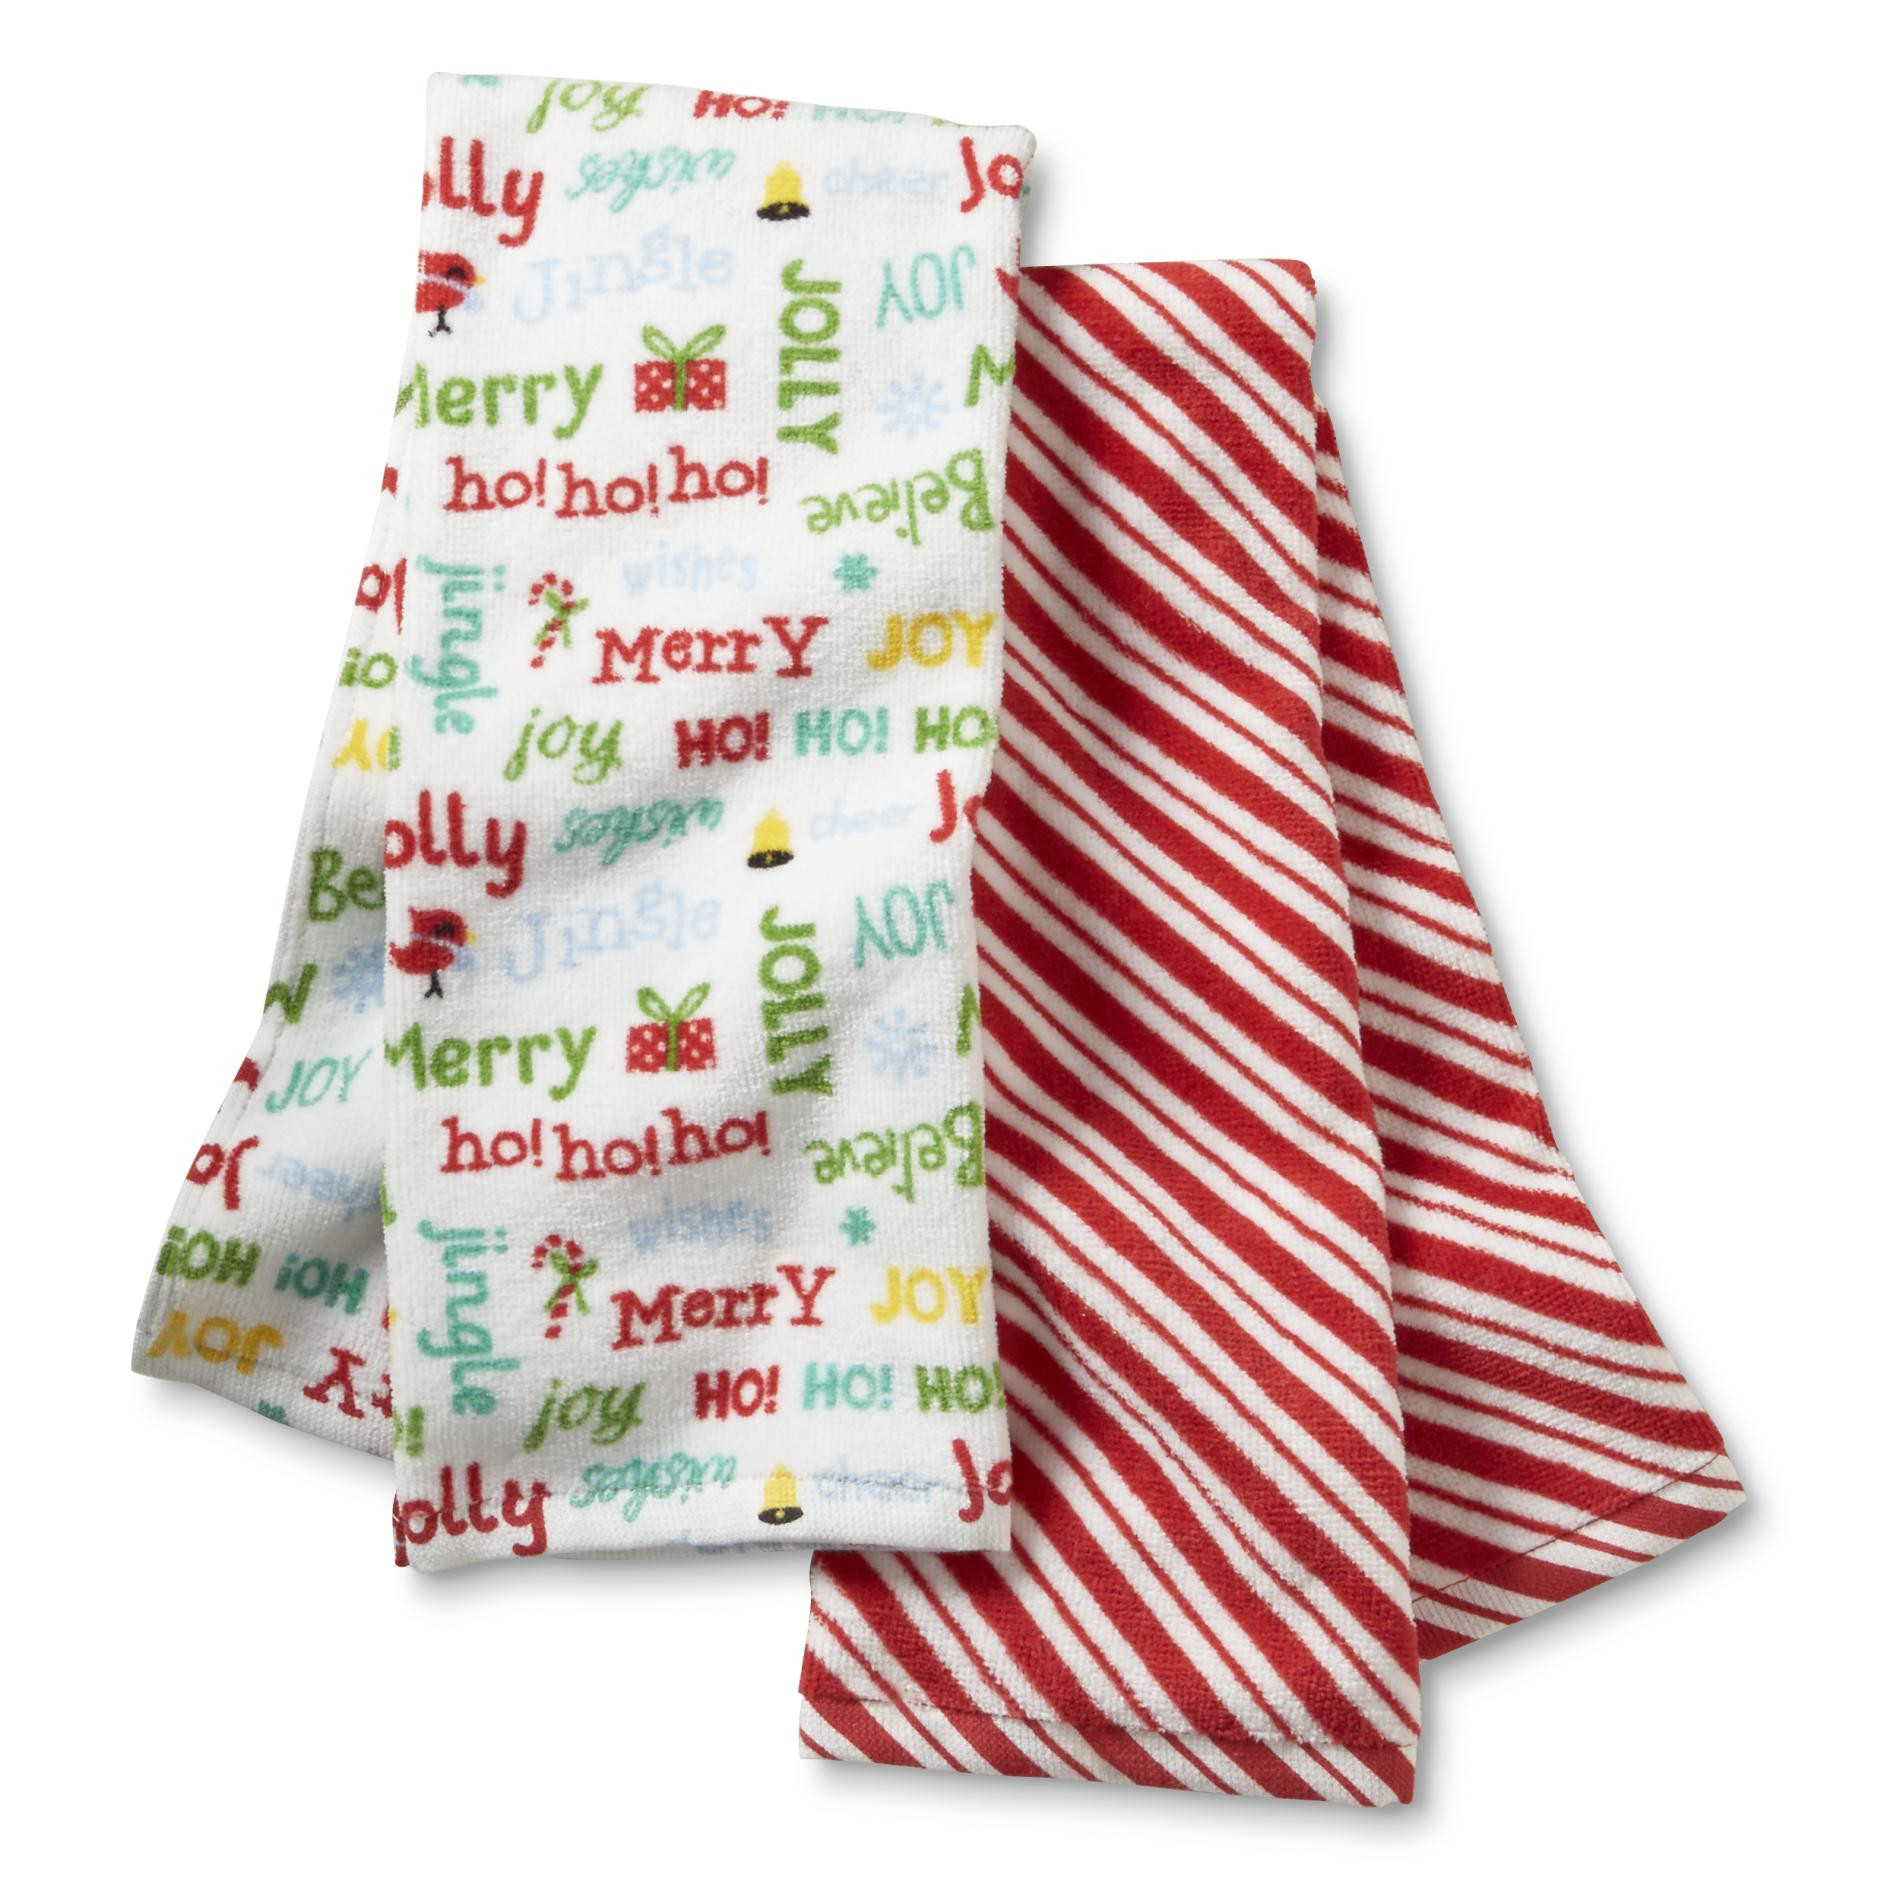 Christmas Kitchen Towels
 Trim A Home 2 Pack Christmas Kitchen Towels Candy Cane